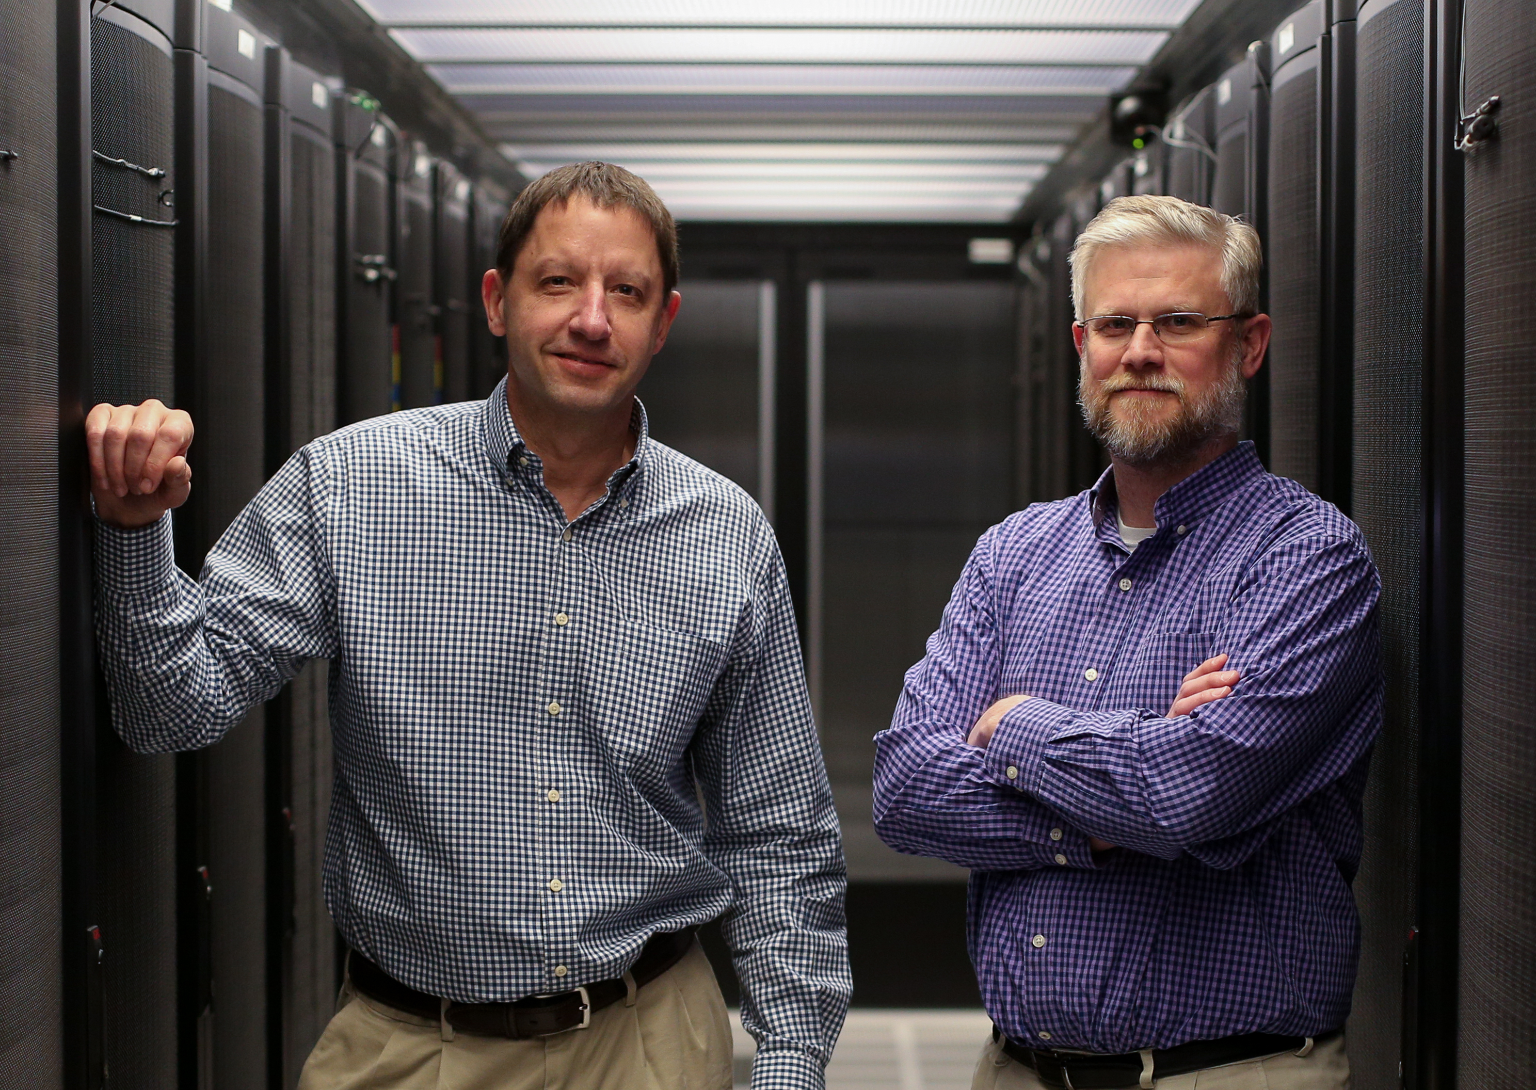 Mike Mike Pfeifer and Bill Sheesley in Union Pacific’s 35,000 sq. ft. Omaha data center